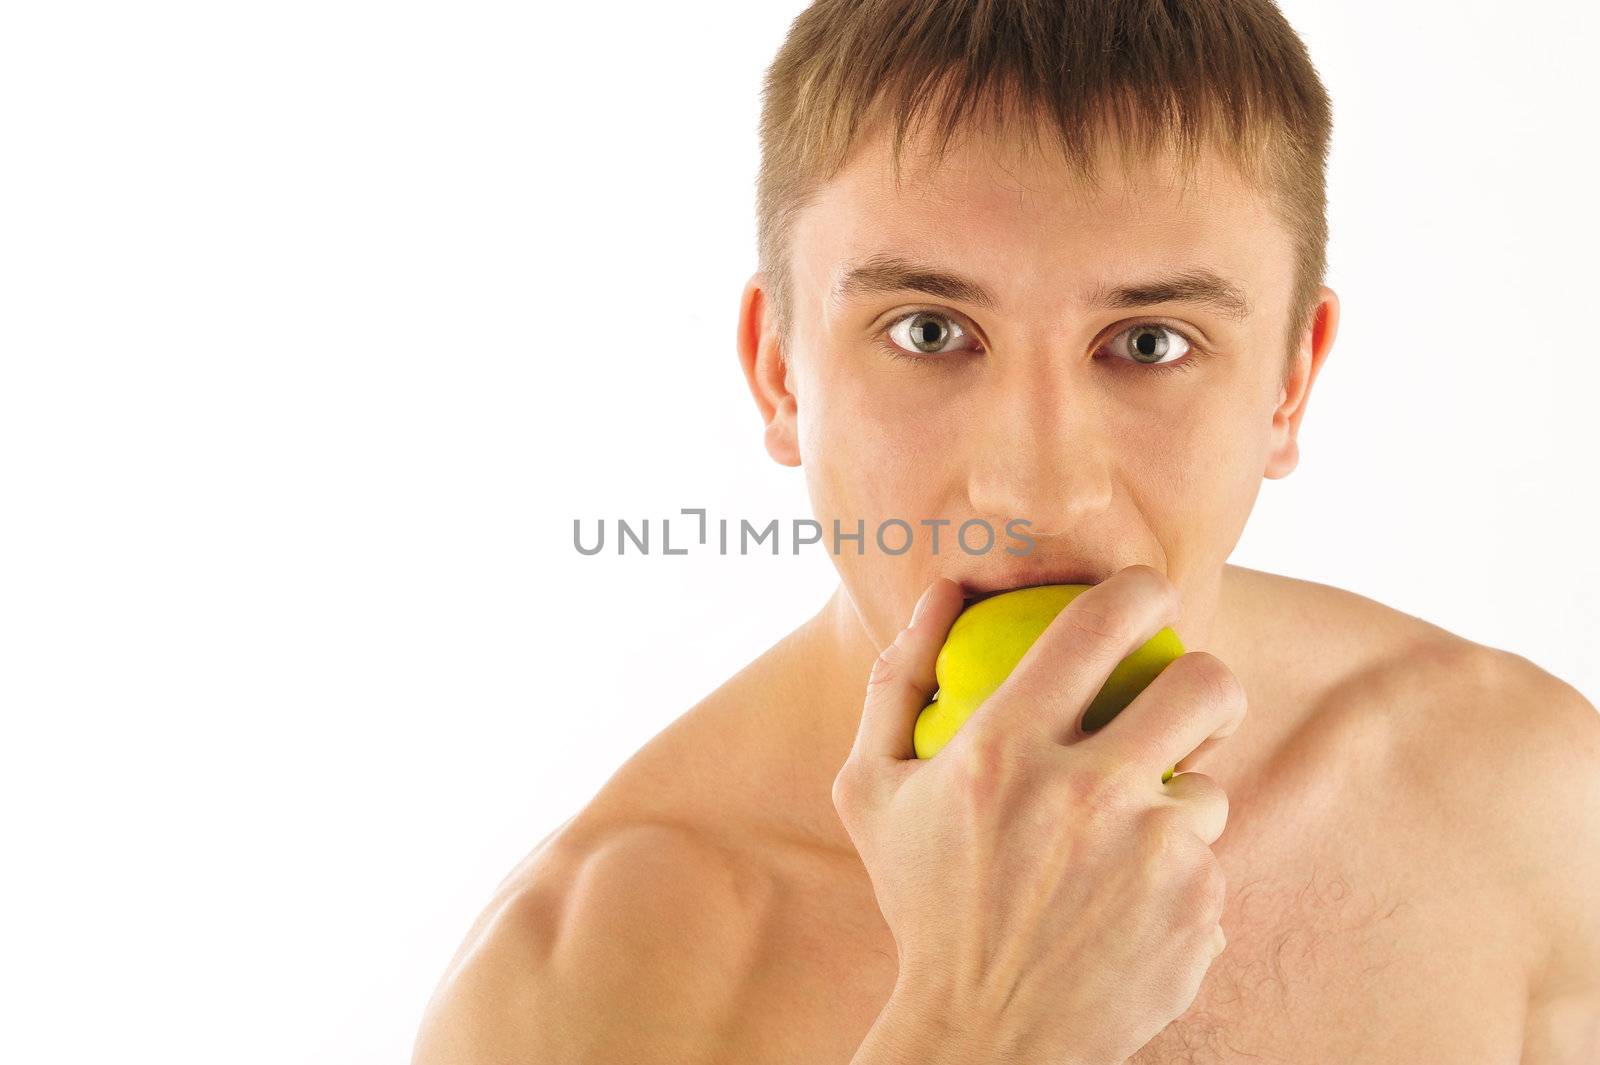  Portrait of man eating an appple symbolizing healthy food